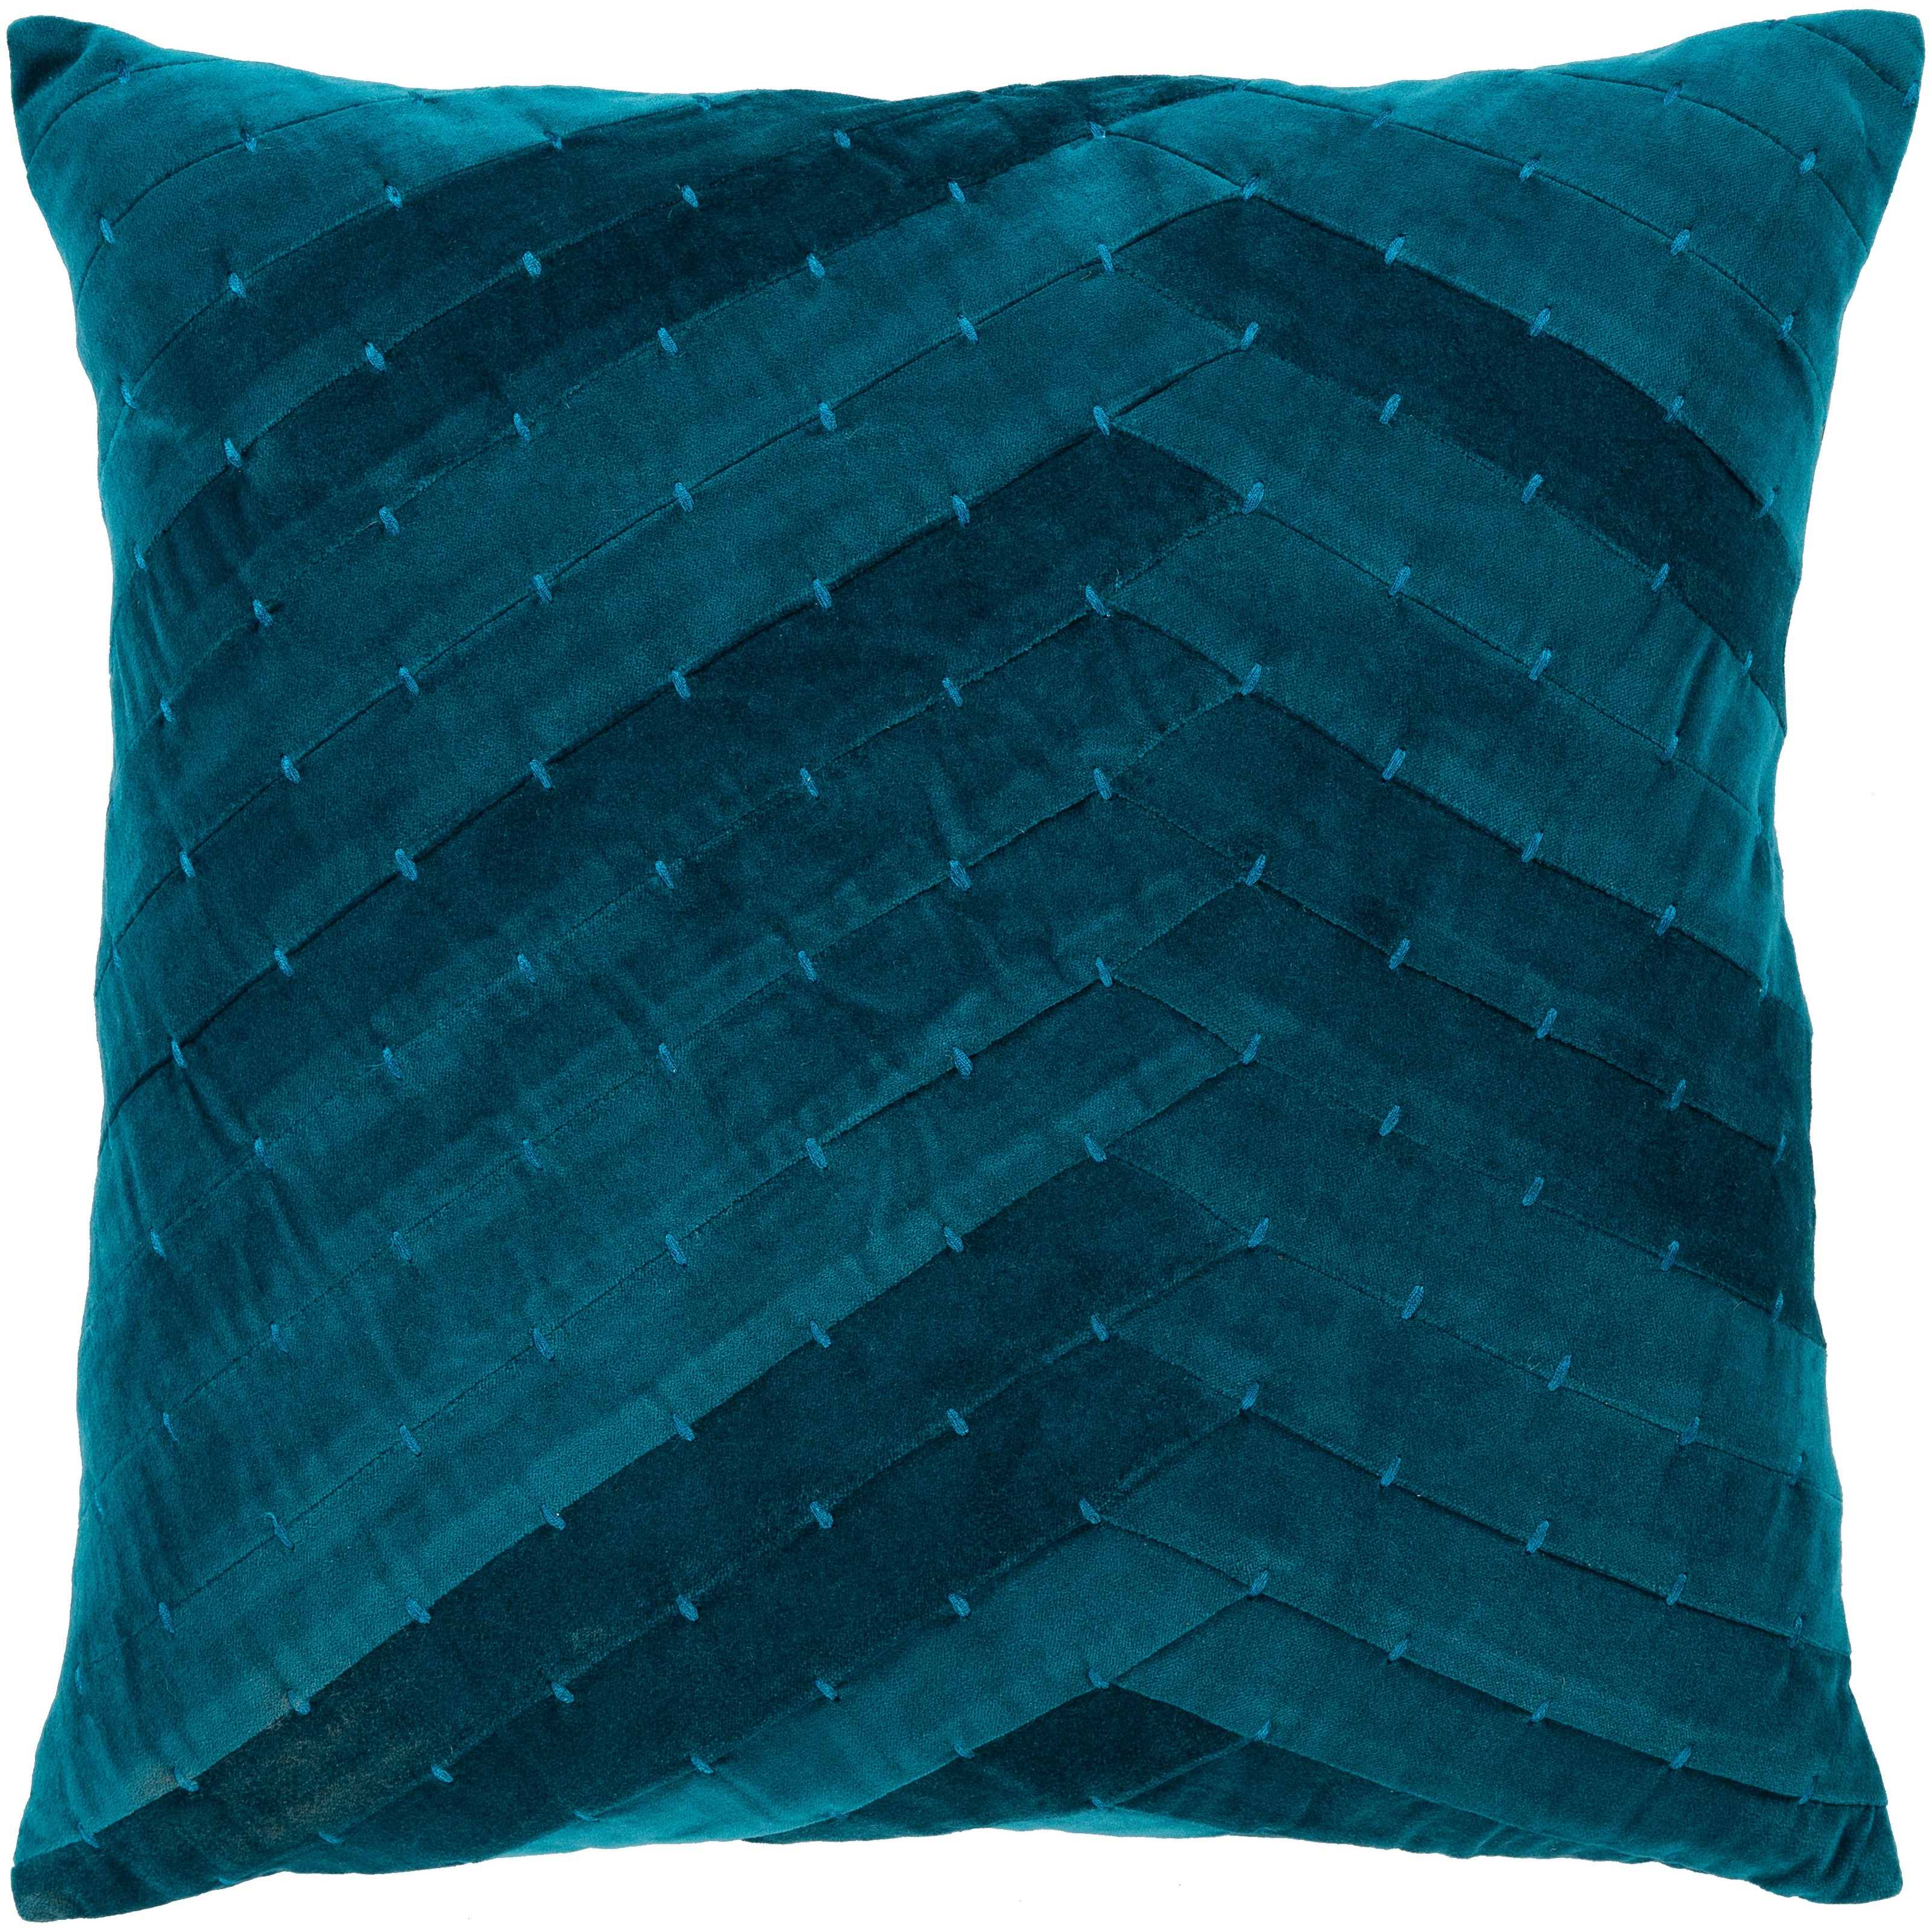 Evangeline Teal Stiched Velvet 20-inch Poly or Feather Down Pillow